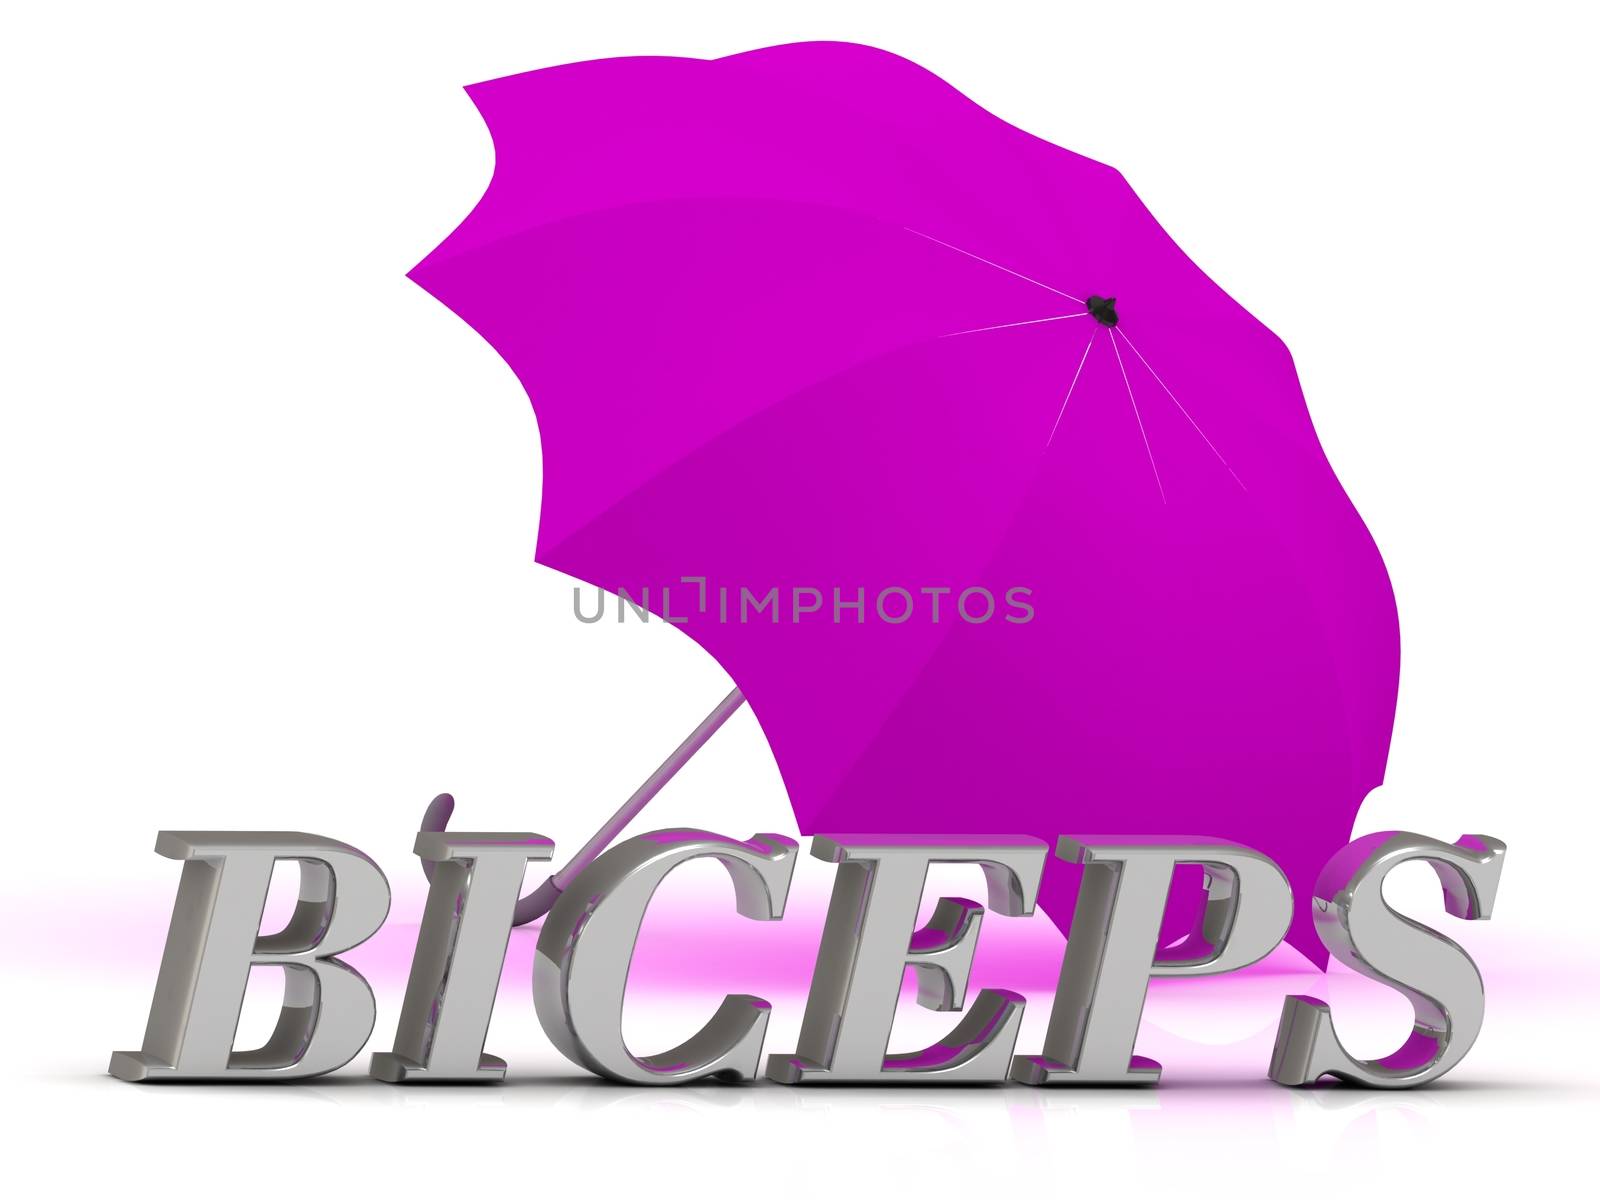 BICEPS- inscription of silver letters and umbrella by GreenMost